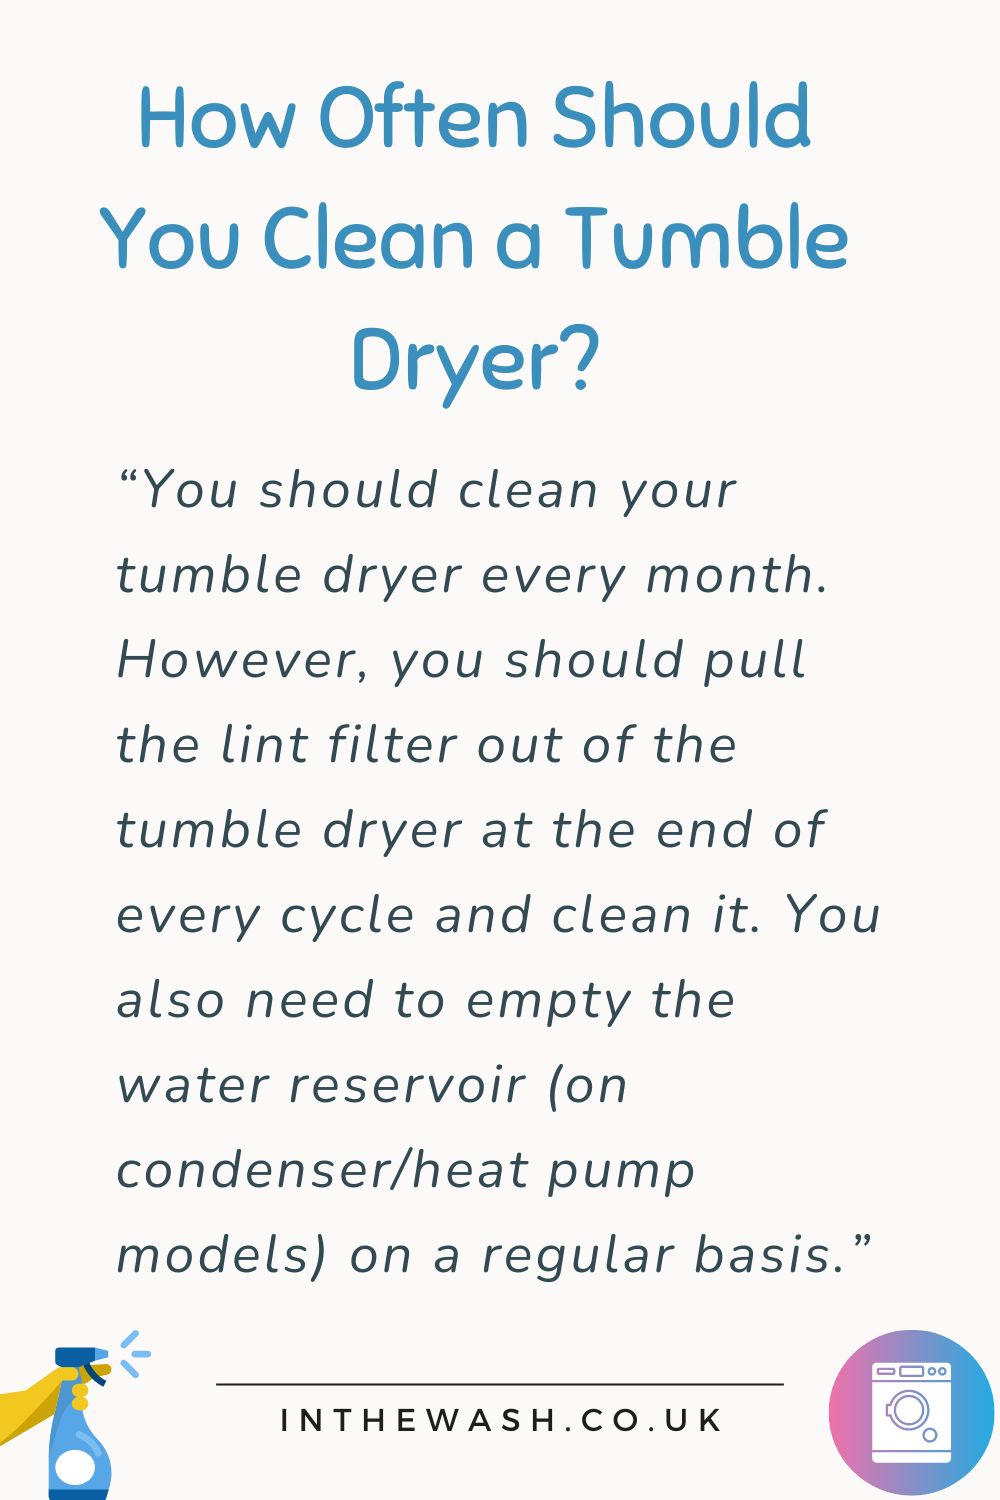 How often to clean a tumble dryer